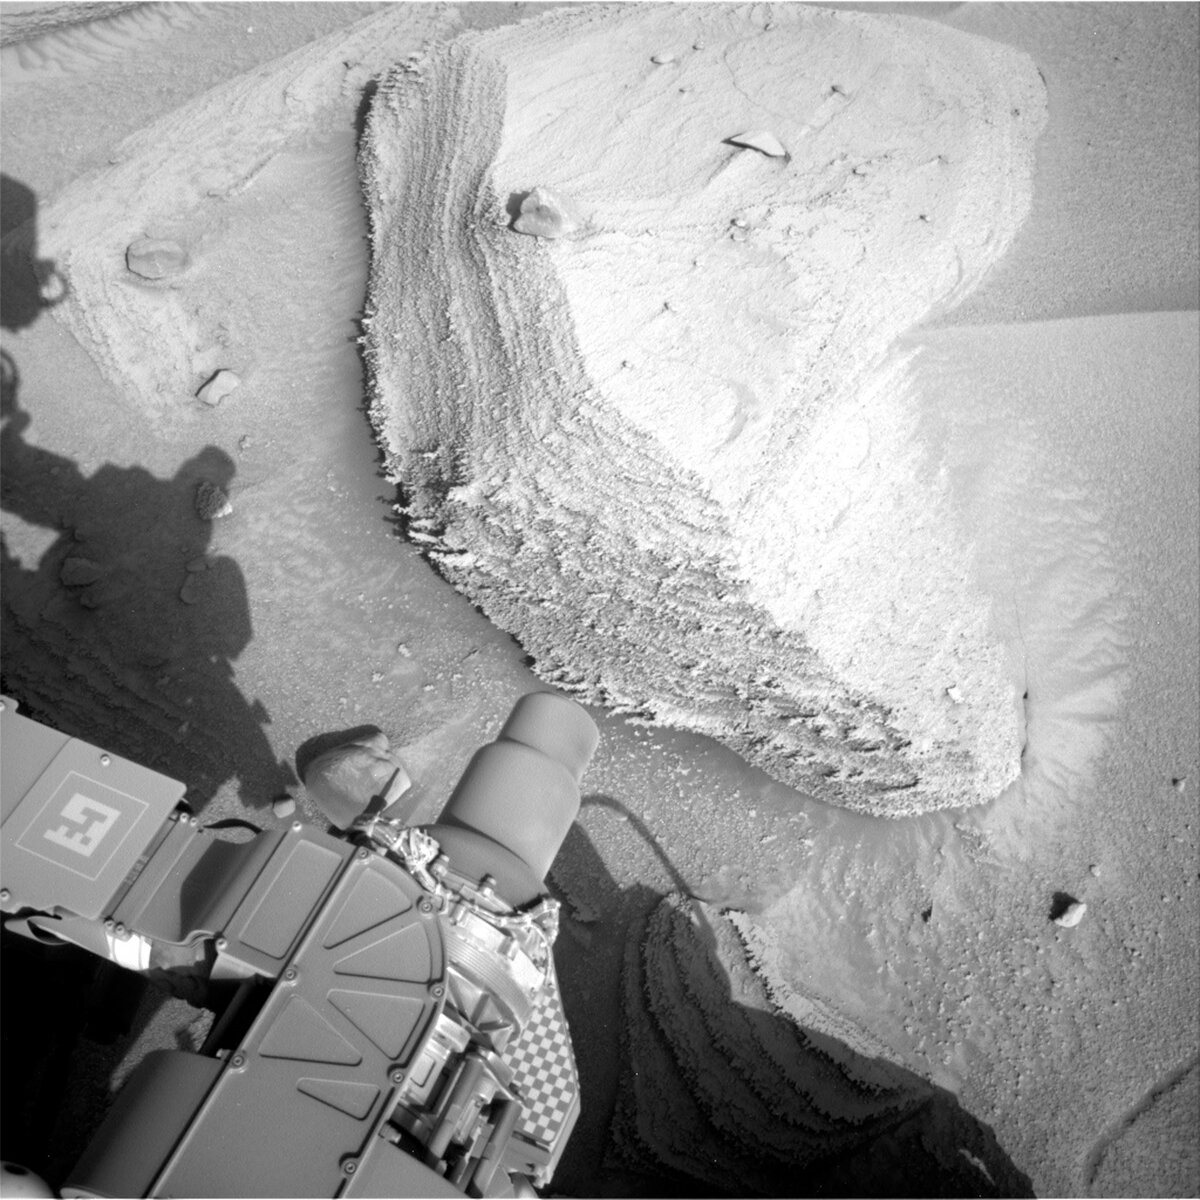 This image shows part of the Curiosity rover's instruments and shadow above the Mars surface, ahead of a rock formation.